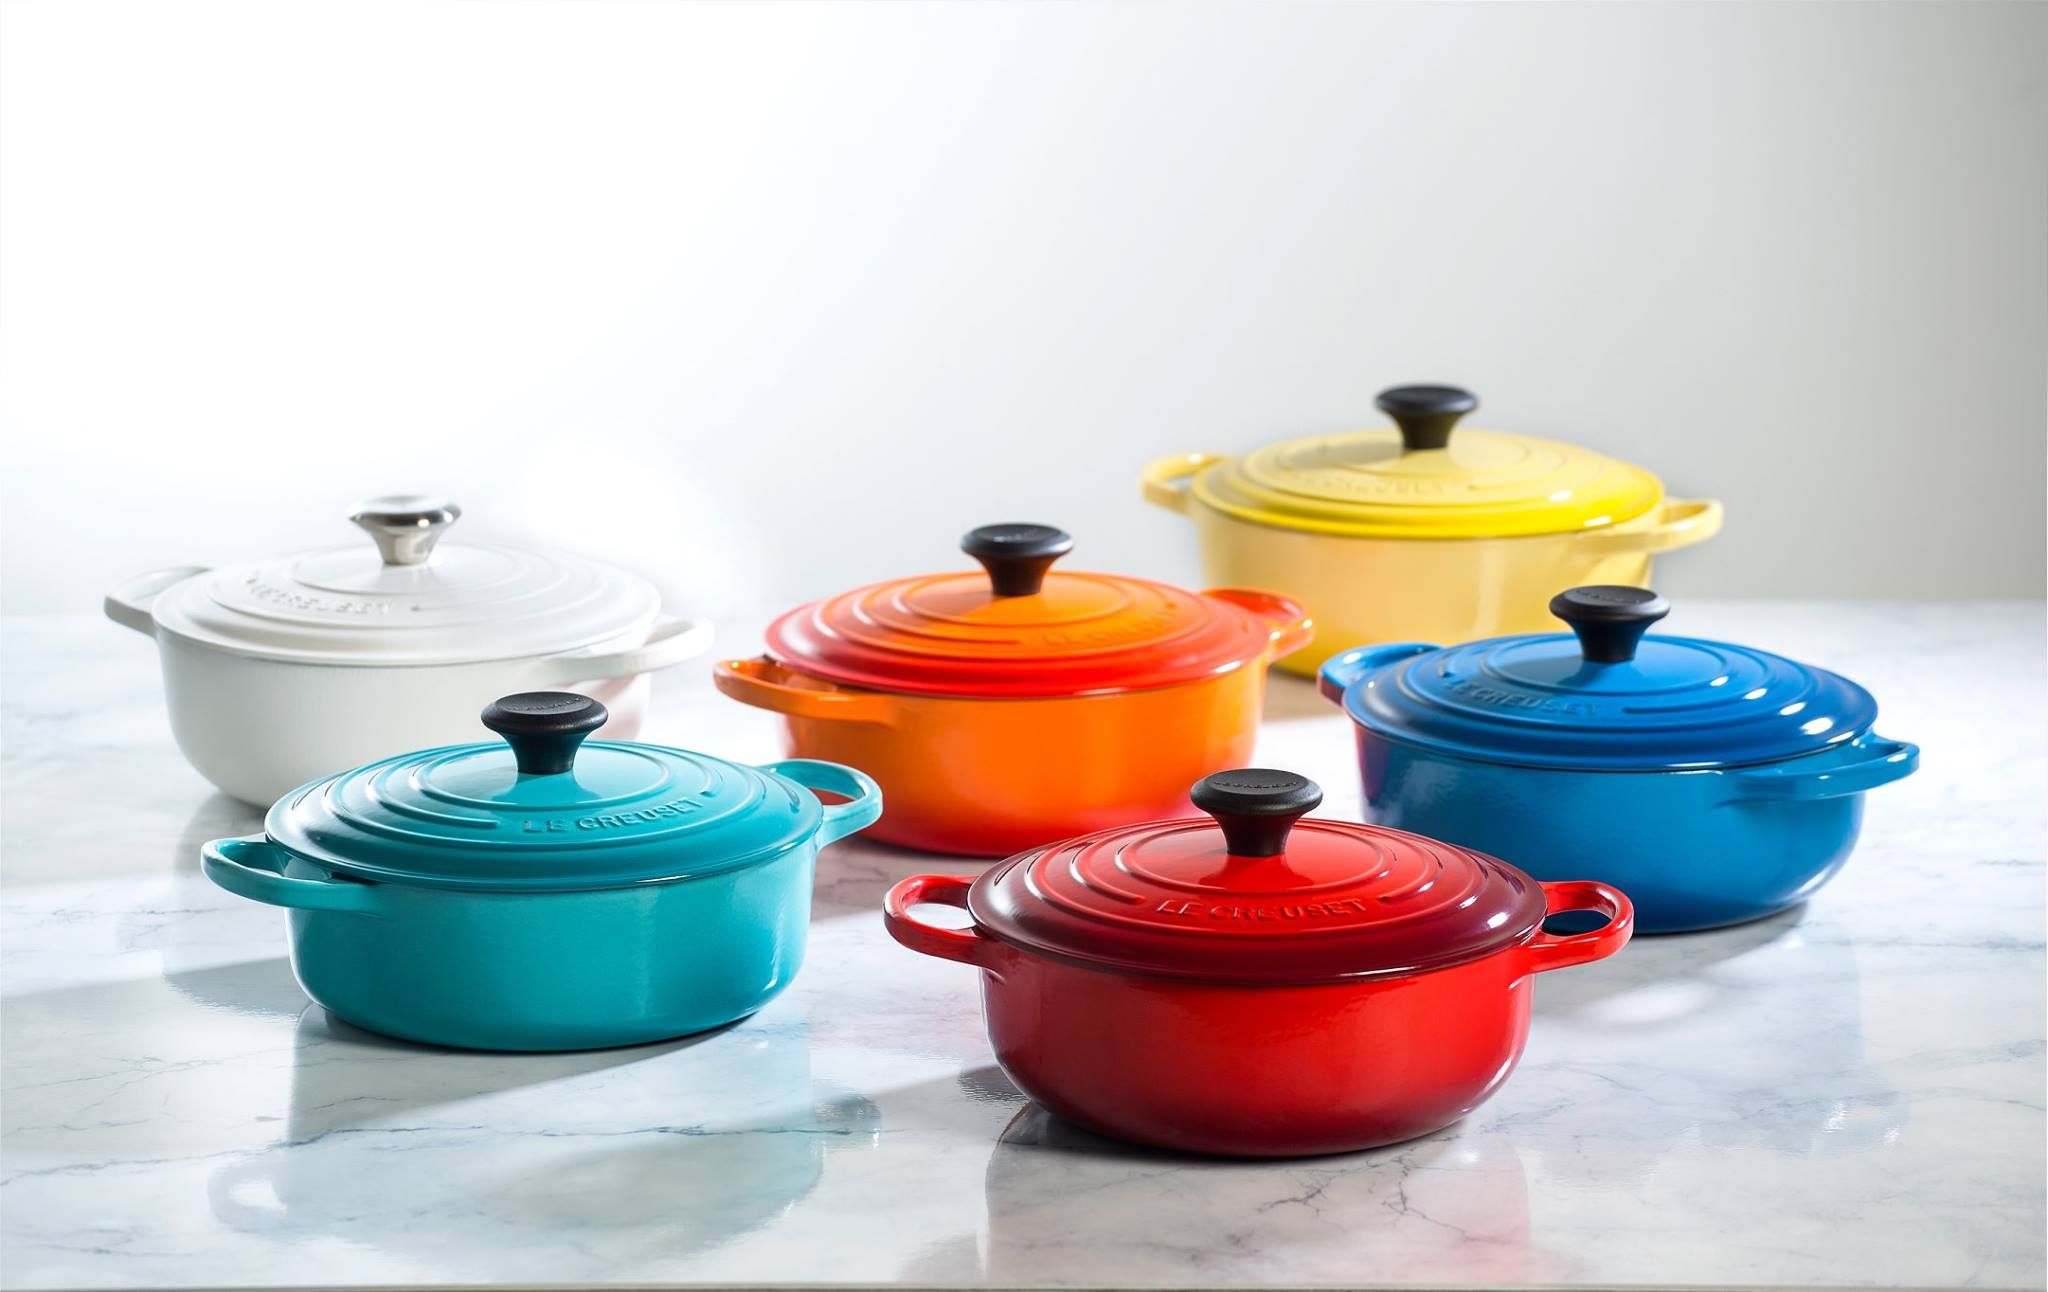 Kruik activering verraad Things You Should Know Before Buying Le Creuset Cookware